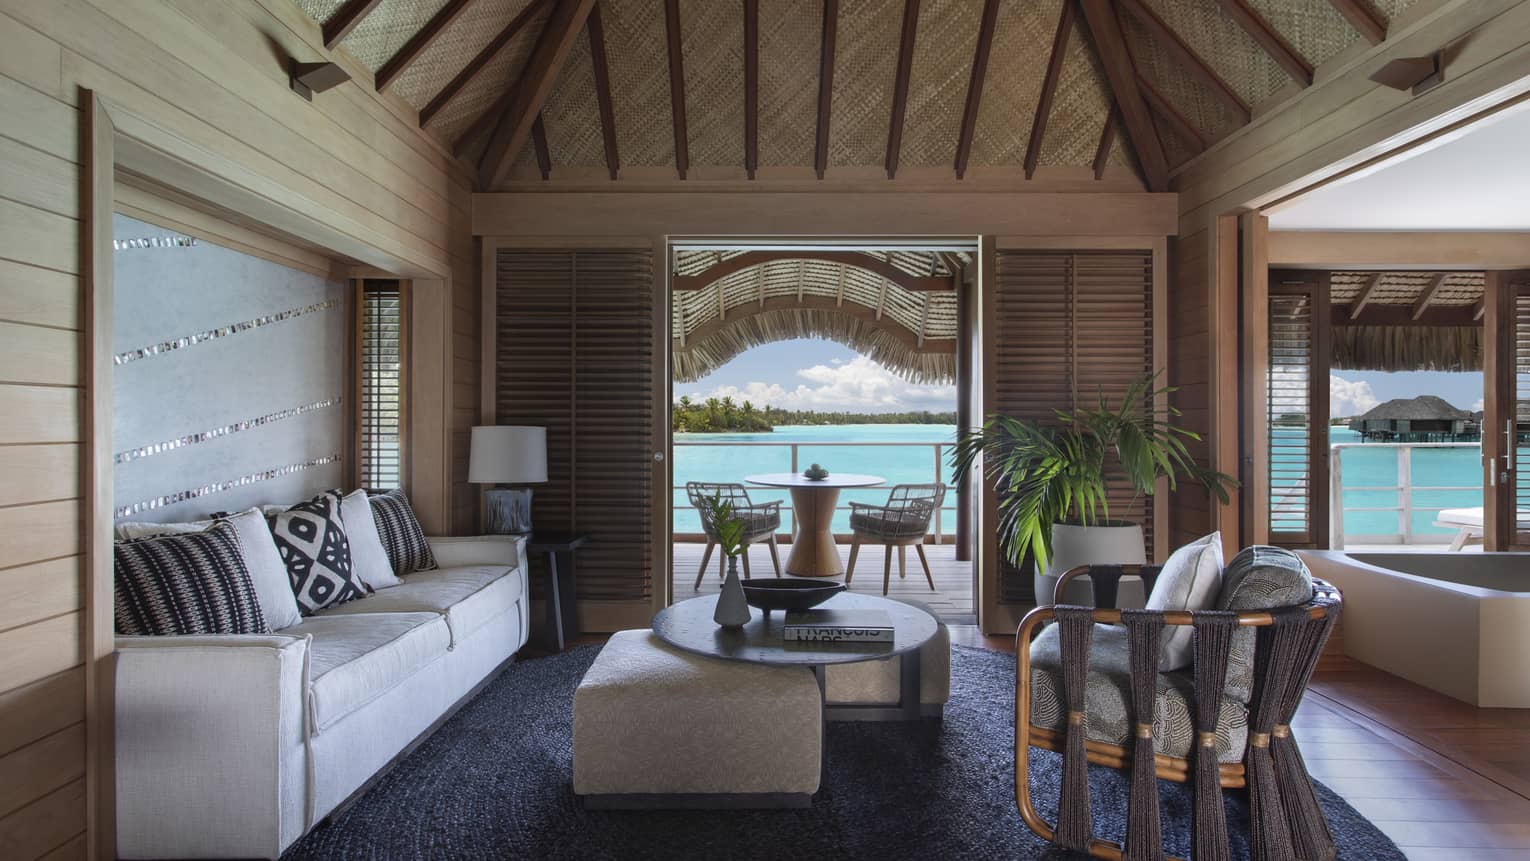 Living room with thatched roof, white sofa, arm chair, coffee table, view of turquoise lagoon